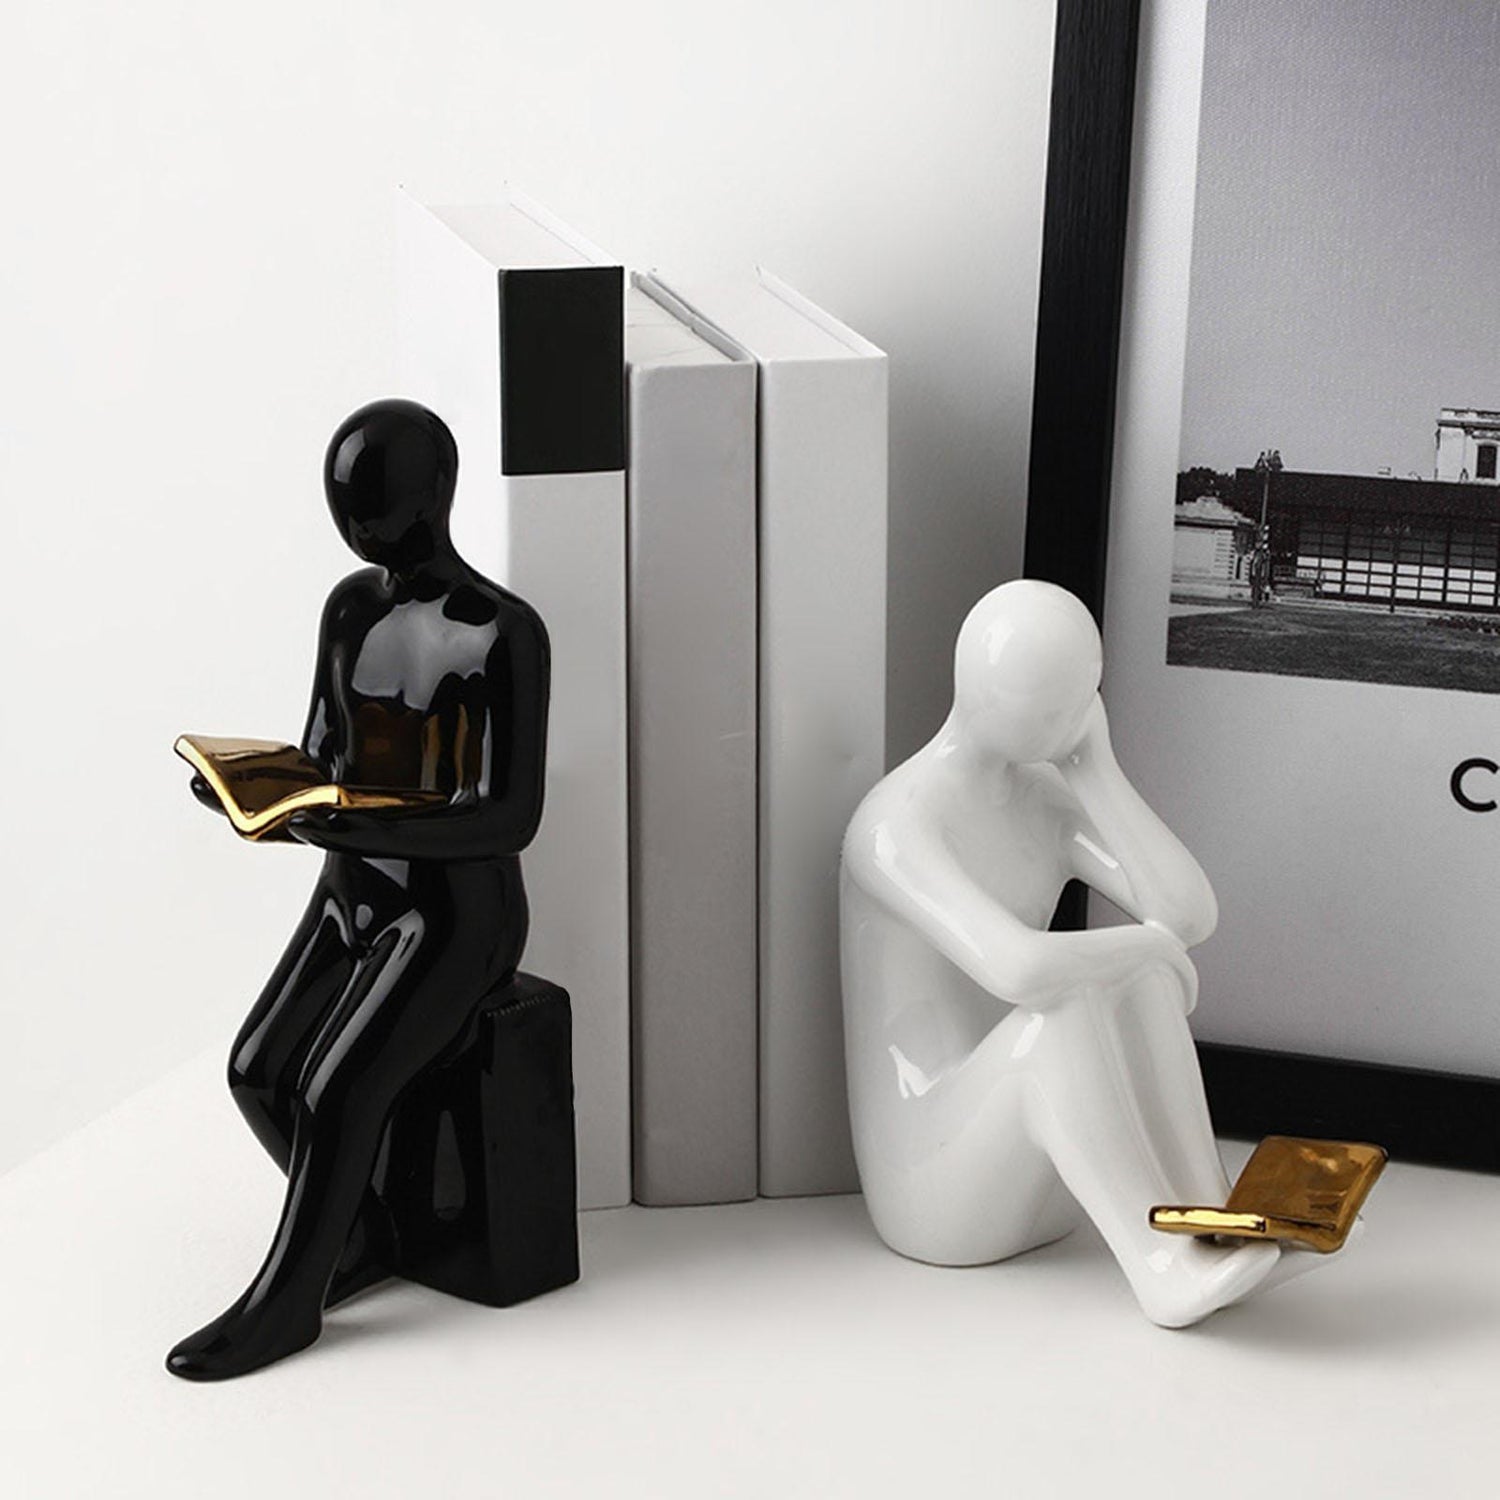 Pair of Ceramic Human Statues Reading Bookend Abstract Figurines